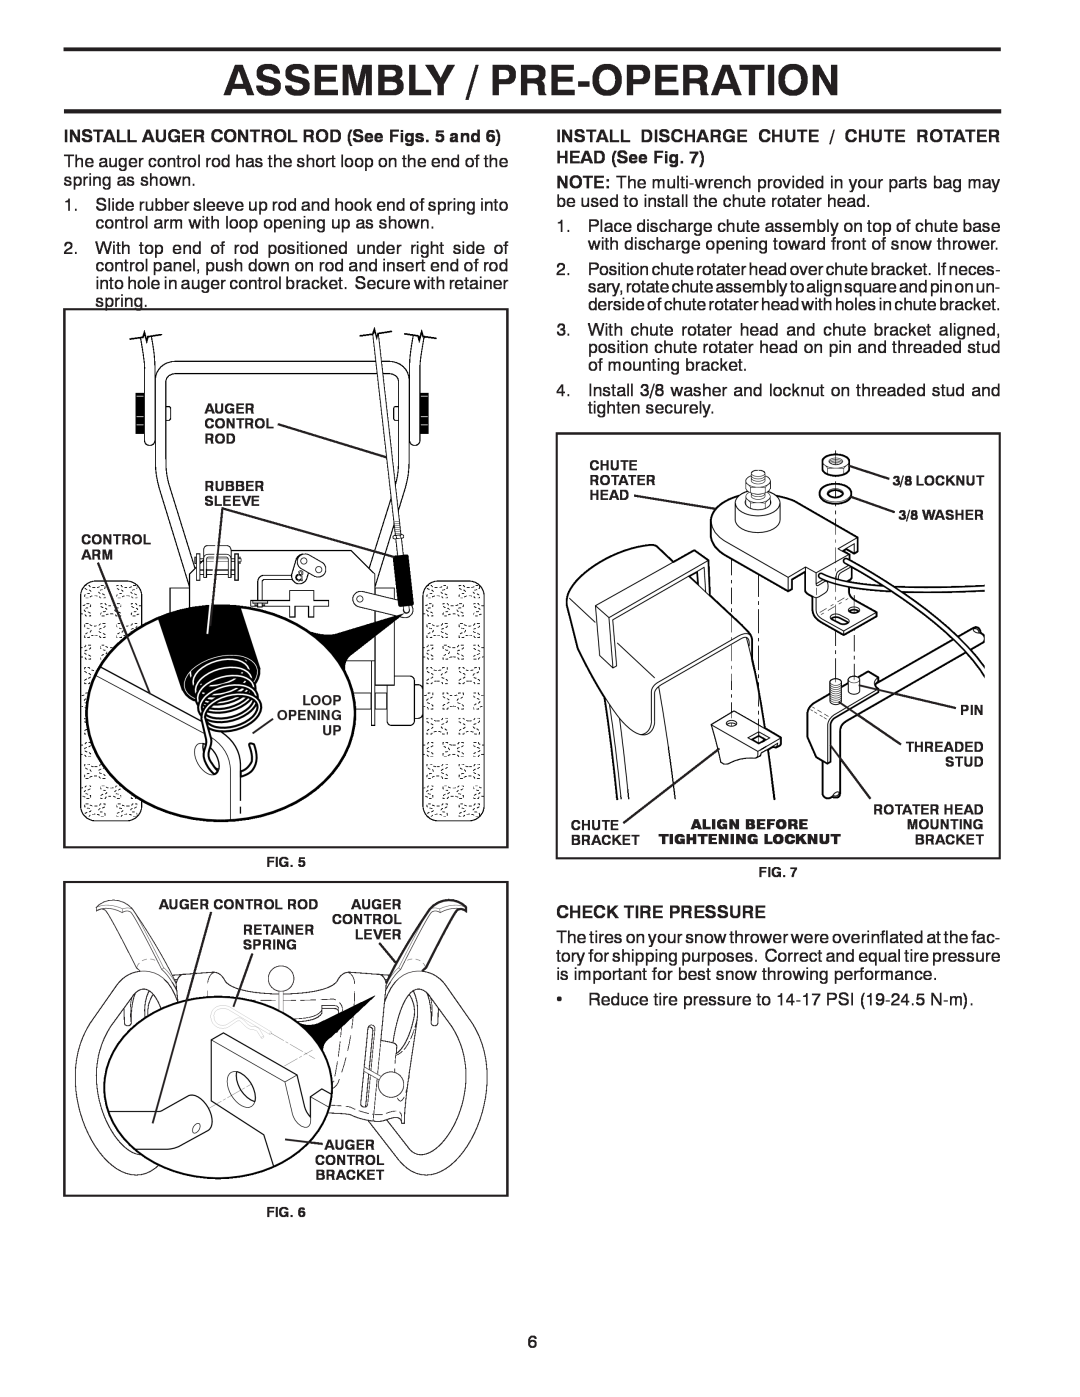 Poulan 416829 owner manual Assembly / Pre-Operation, INSTALL AUGER CONTROL ROD See Figs. 5 and, Check Tire Pressure 